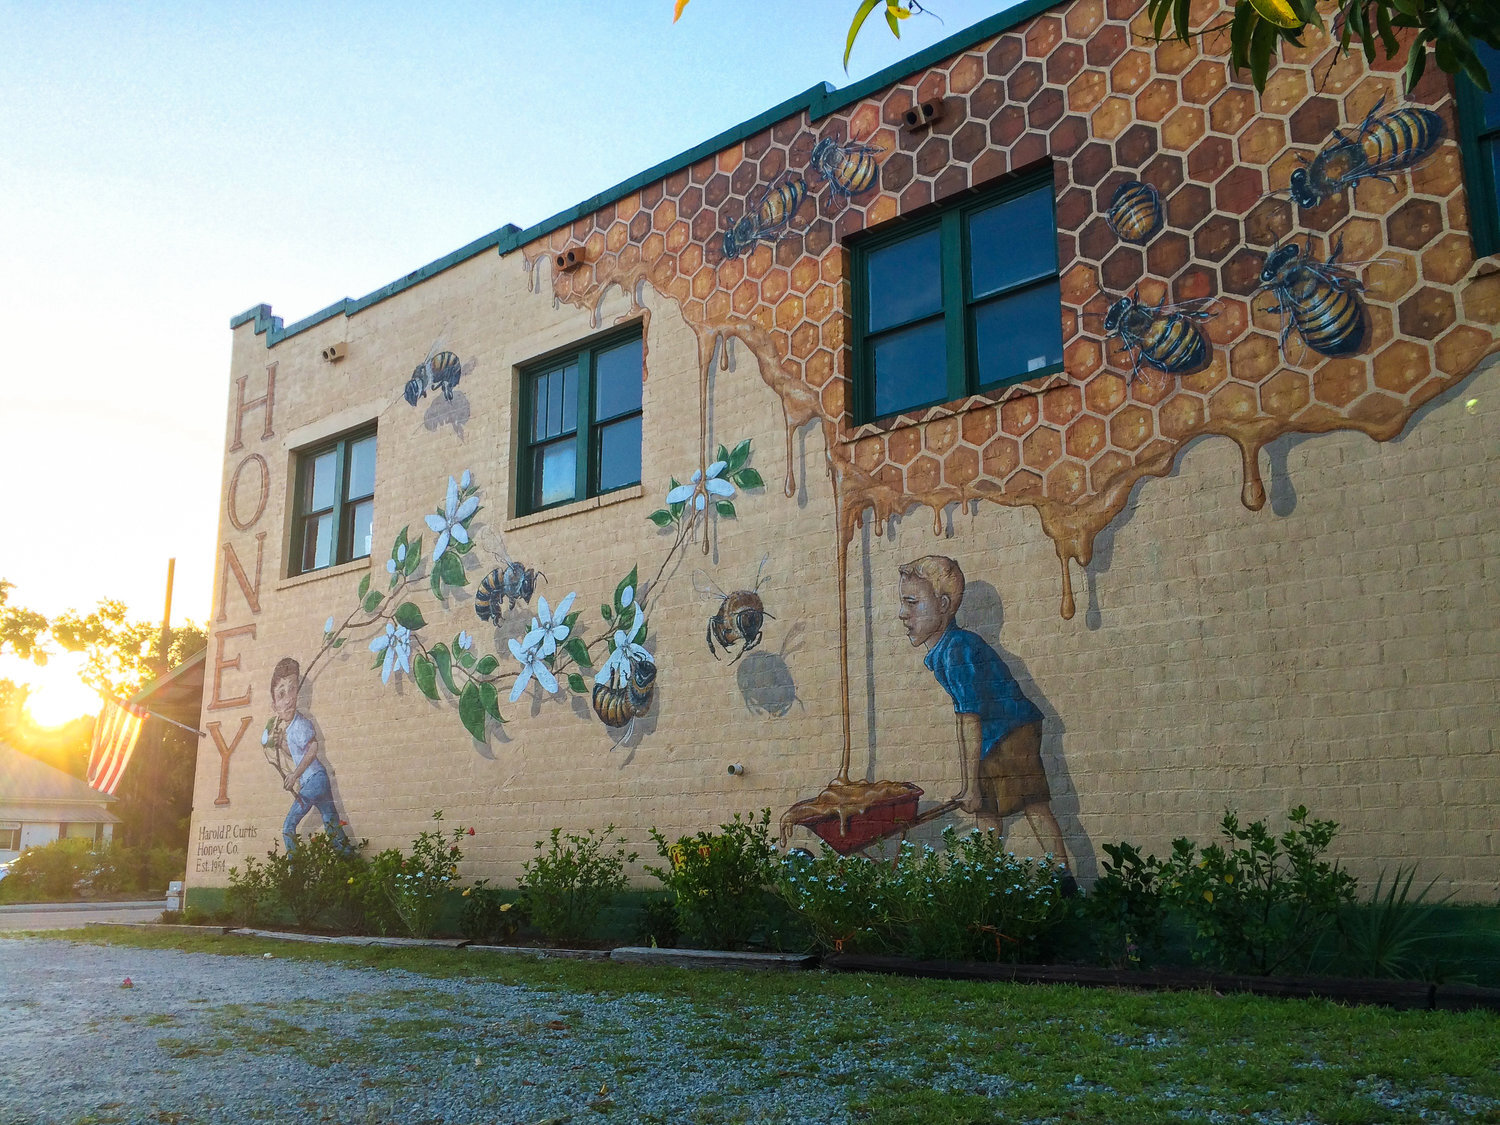 The completed mural with the sun behind it